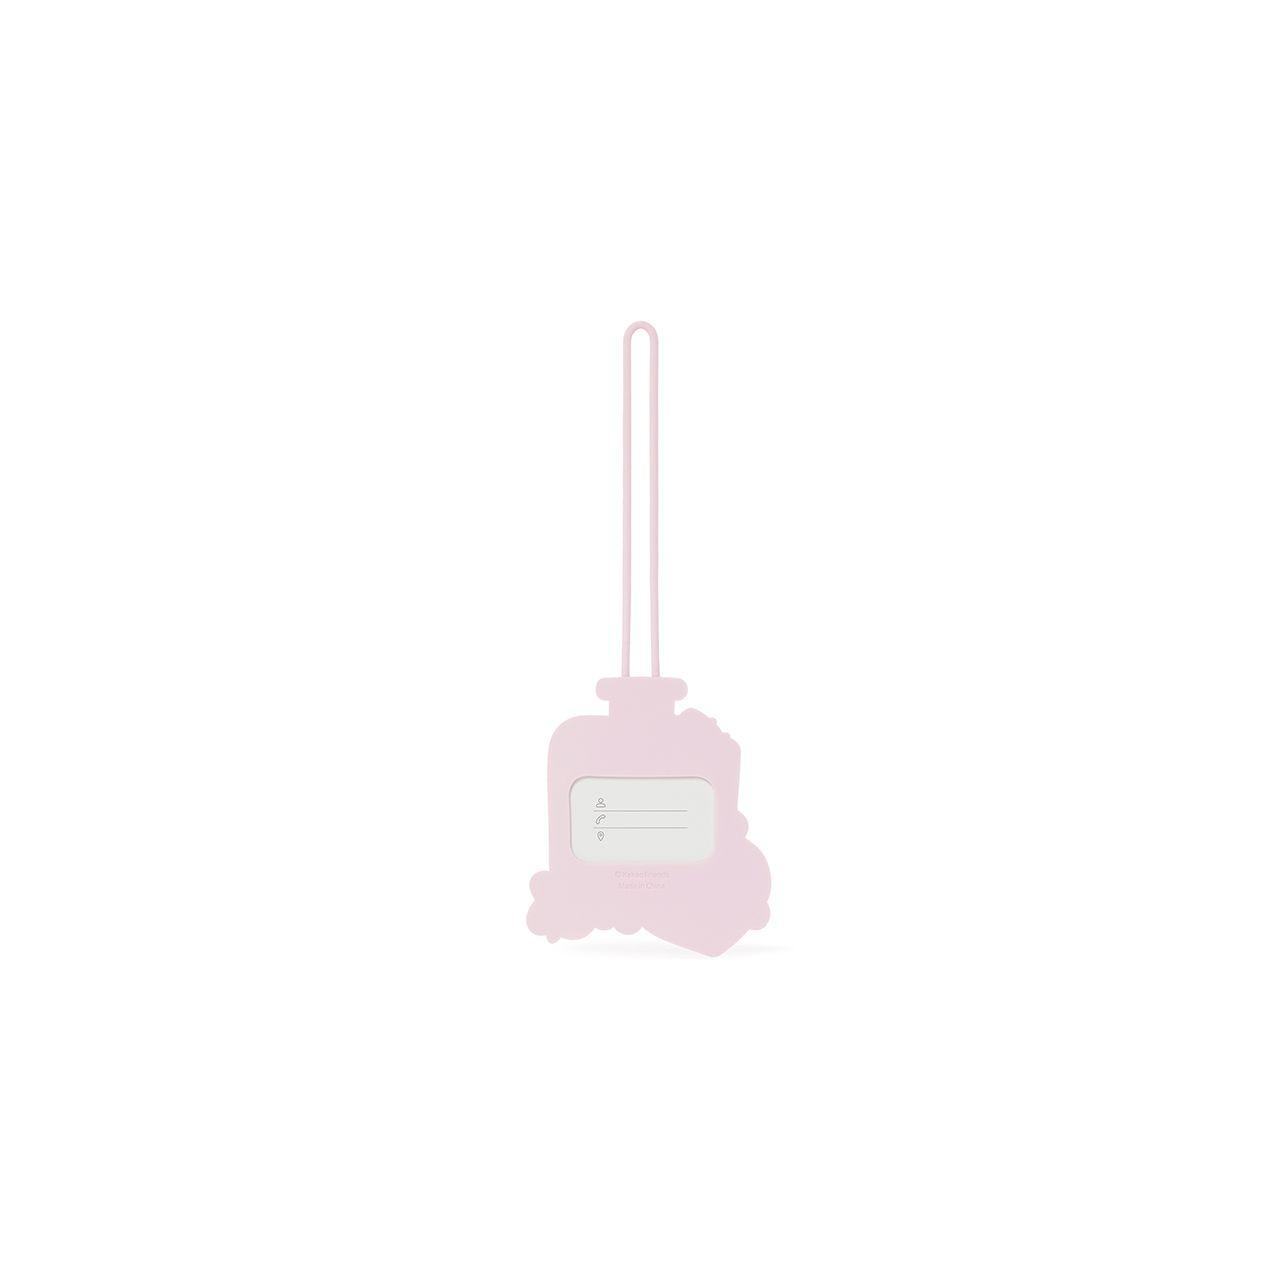 Kakao Friends - Luggage Tag - Kgift.shop